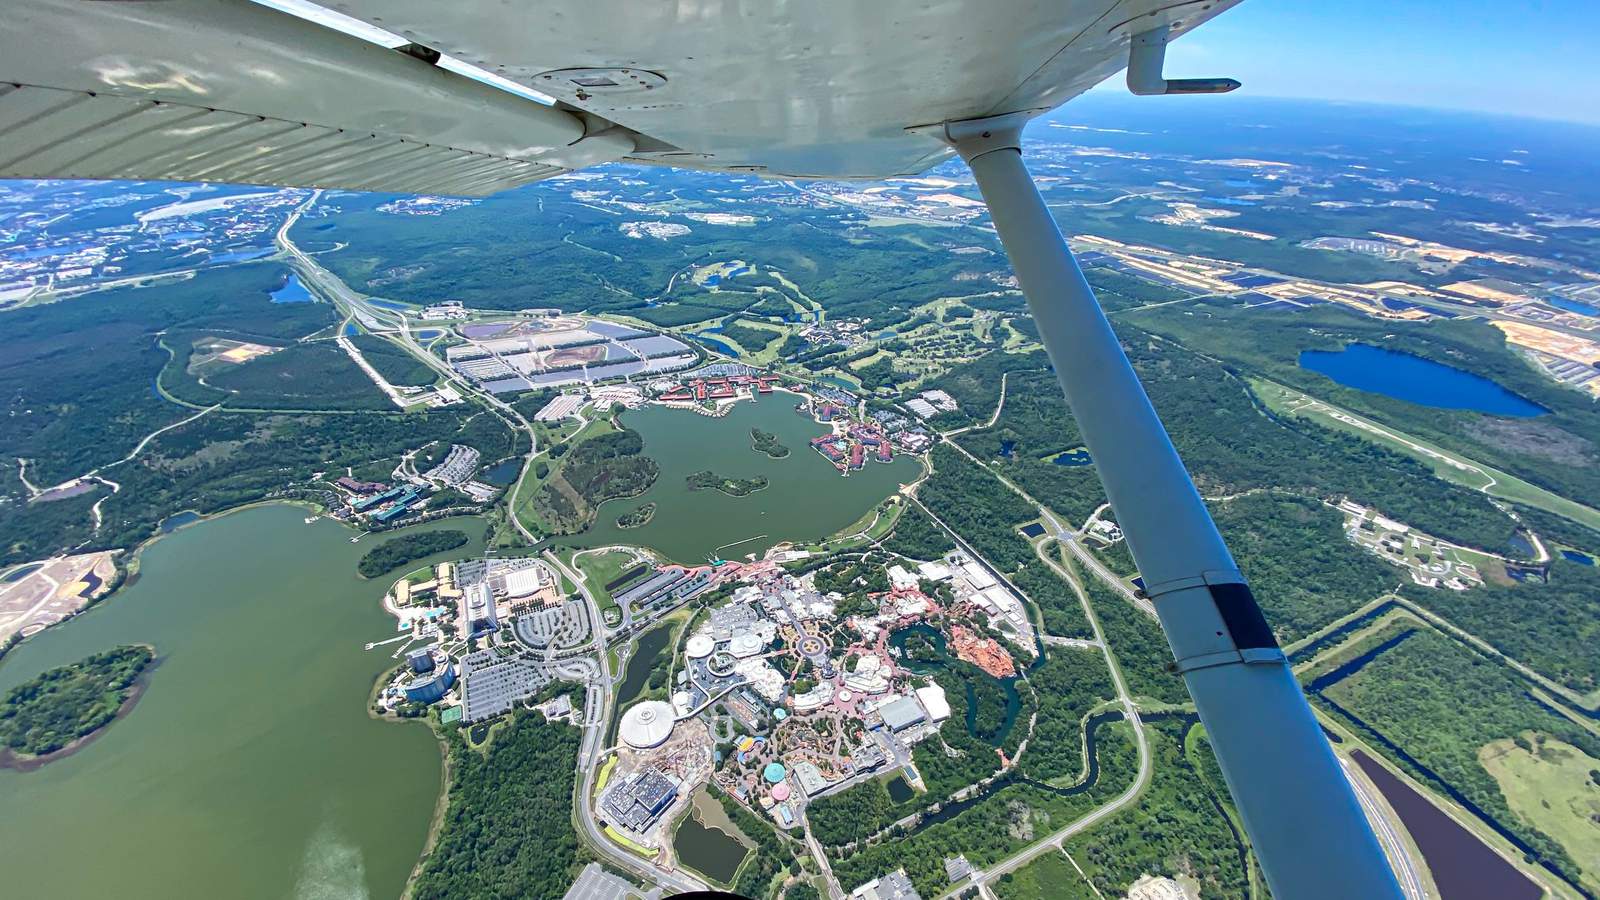 You can fly: Get a bird’s eye view into a deserted Walt Disney World